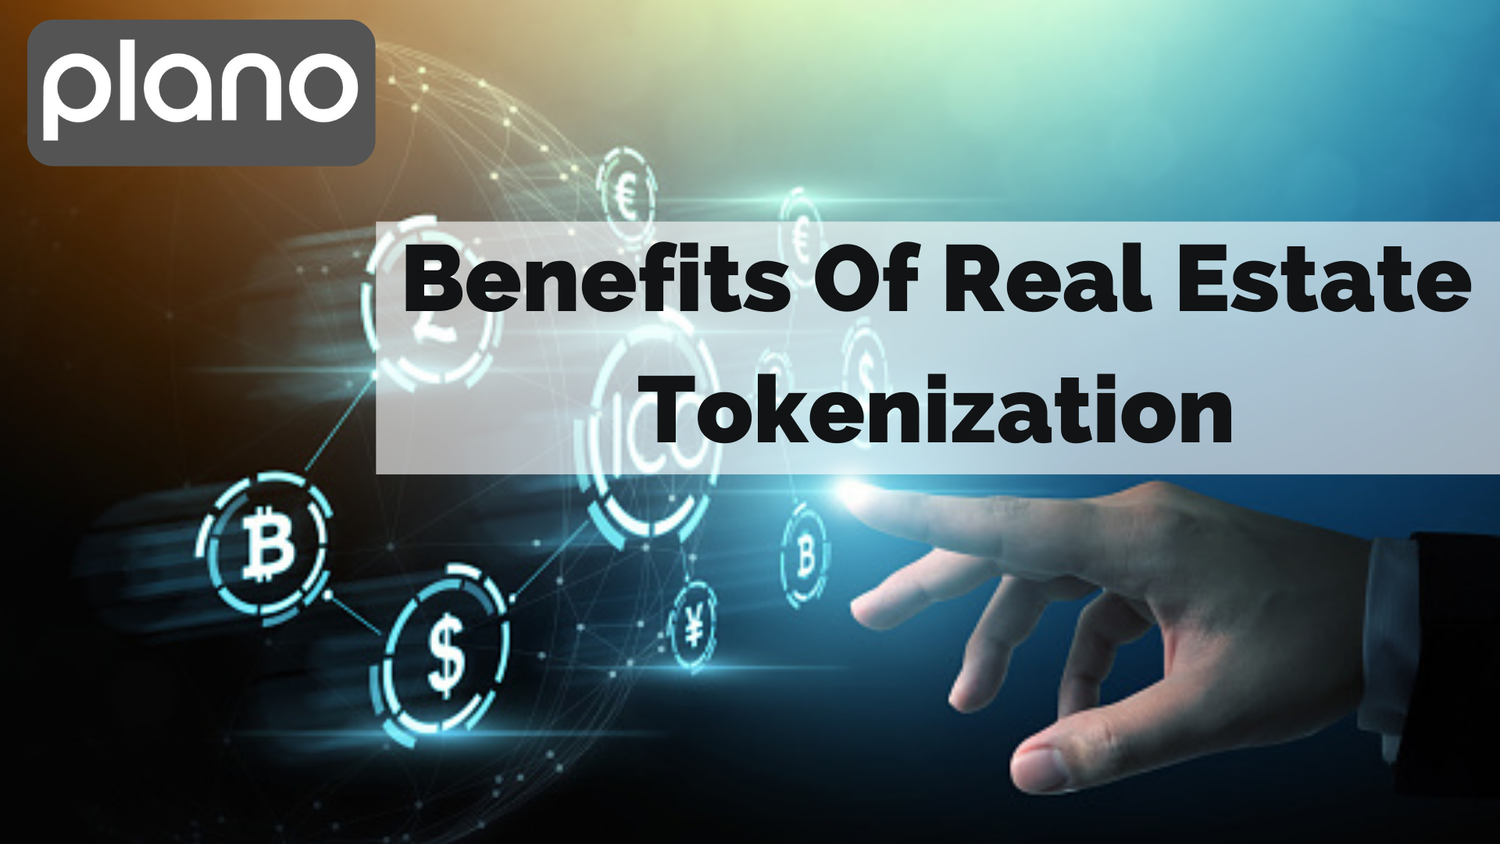 Plano to make your tokenization of real estate with ease! — Plano